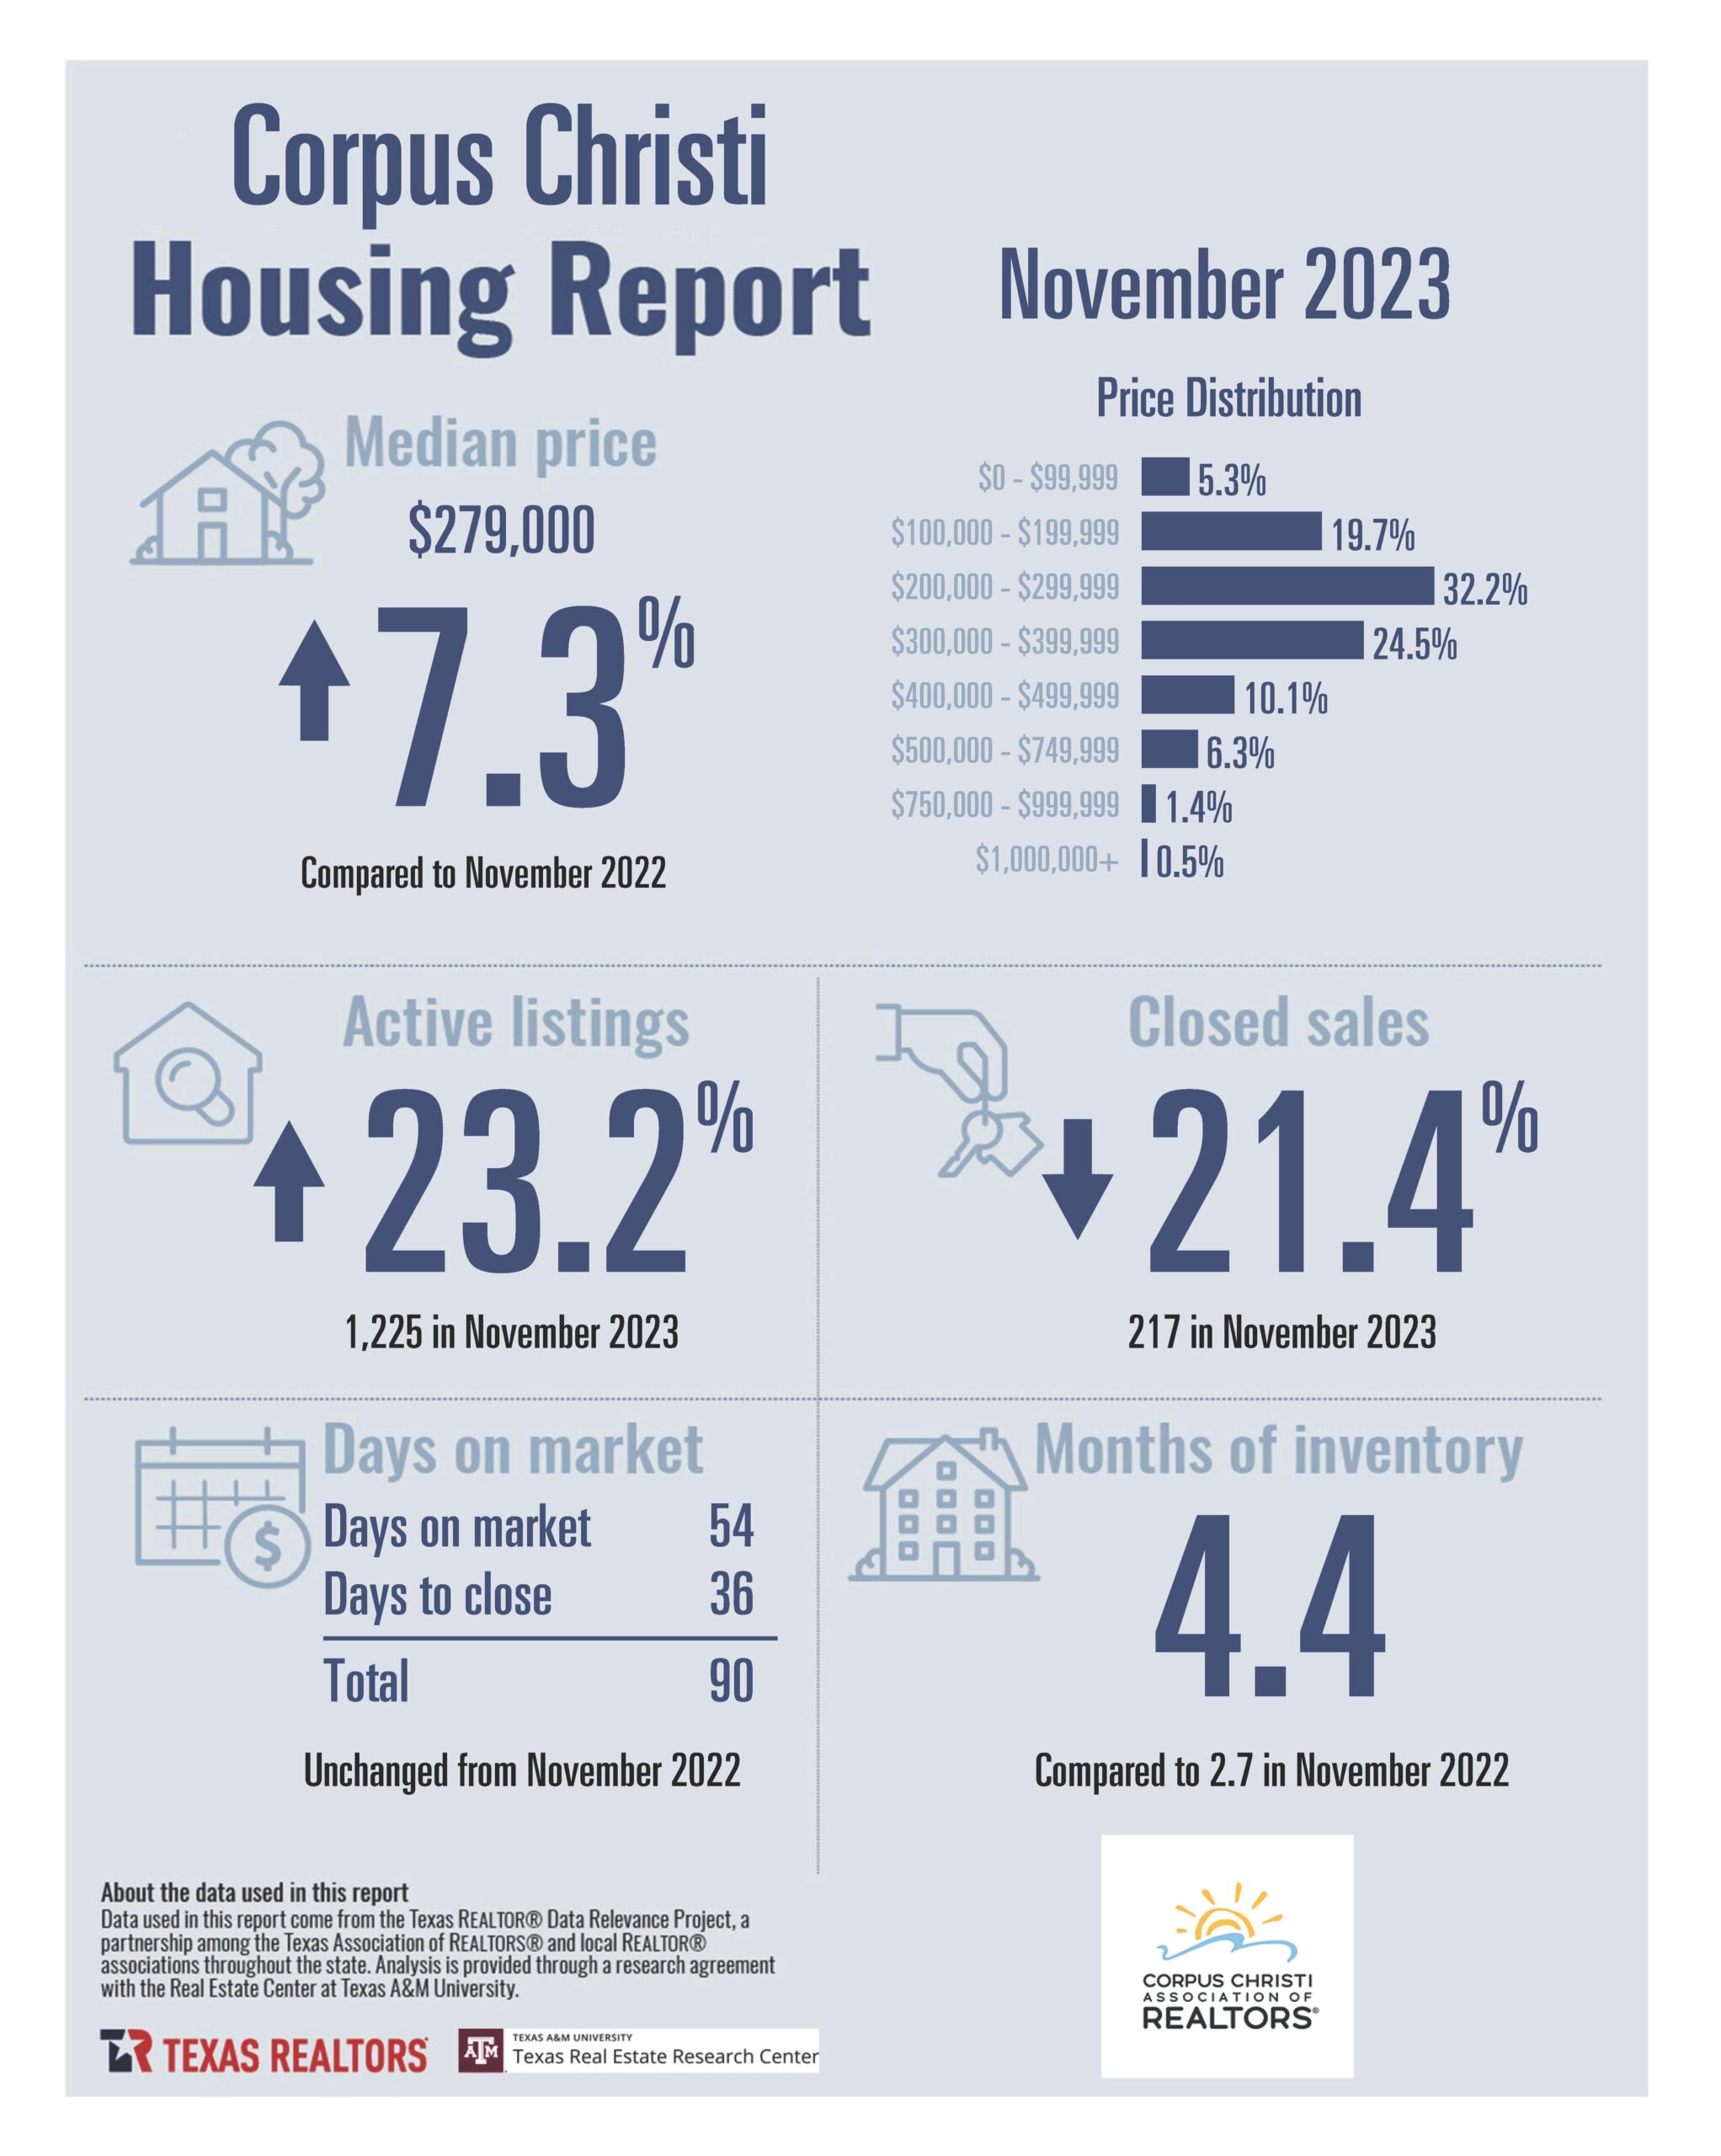 This image shows the housing market statistics for Corpus Christi in November 2023.